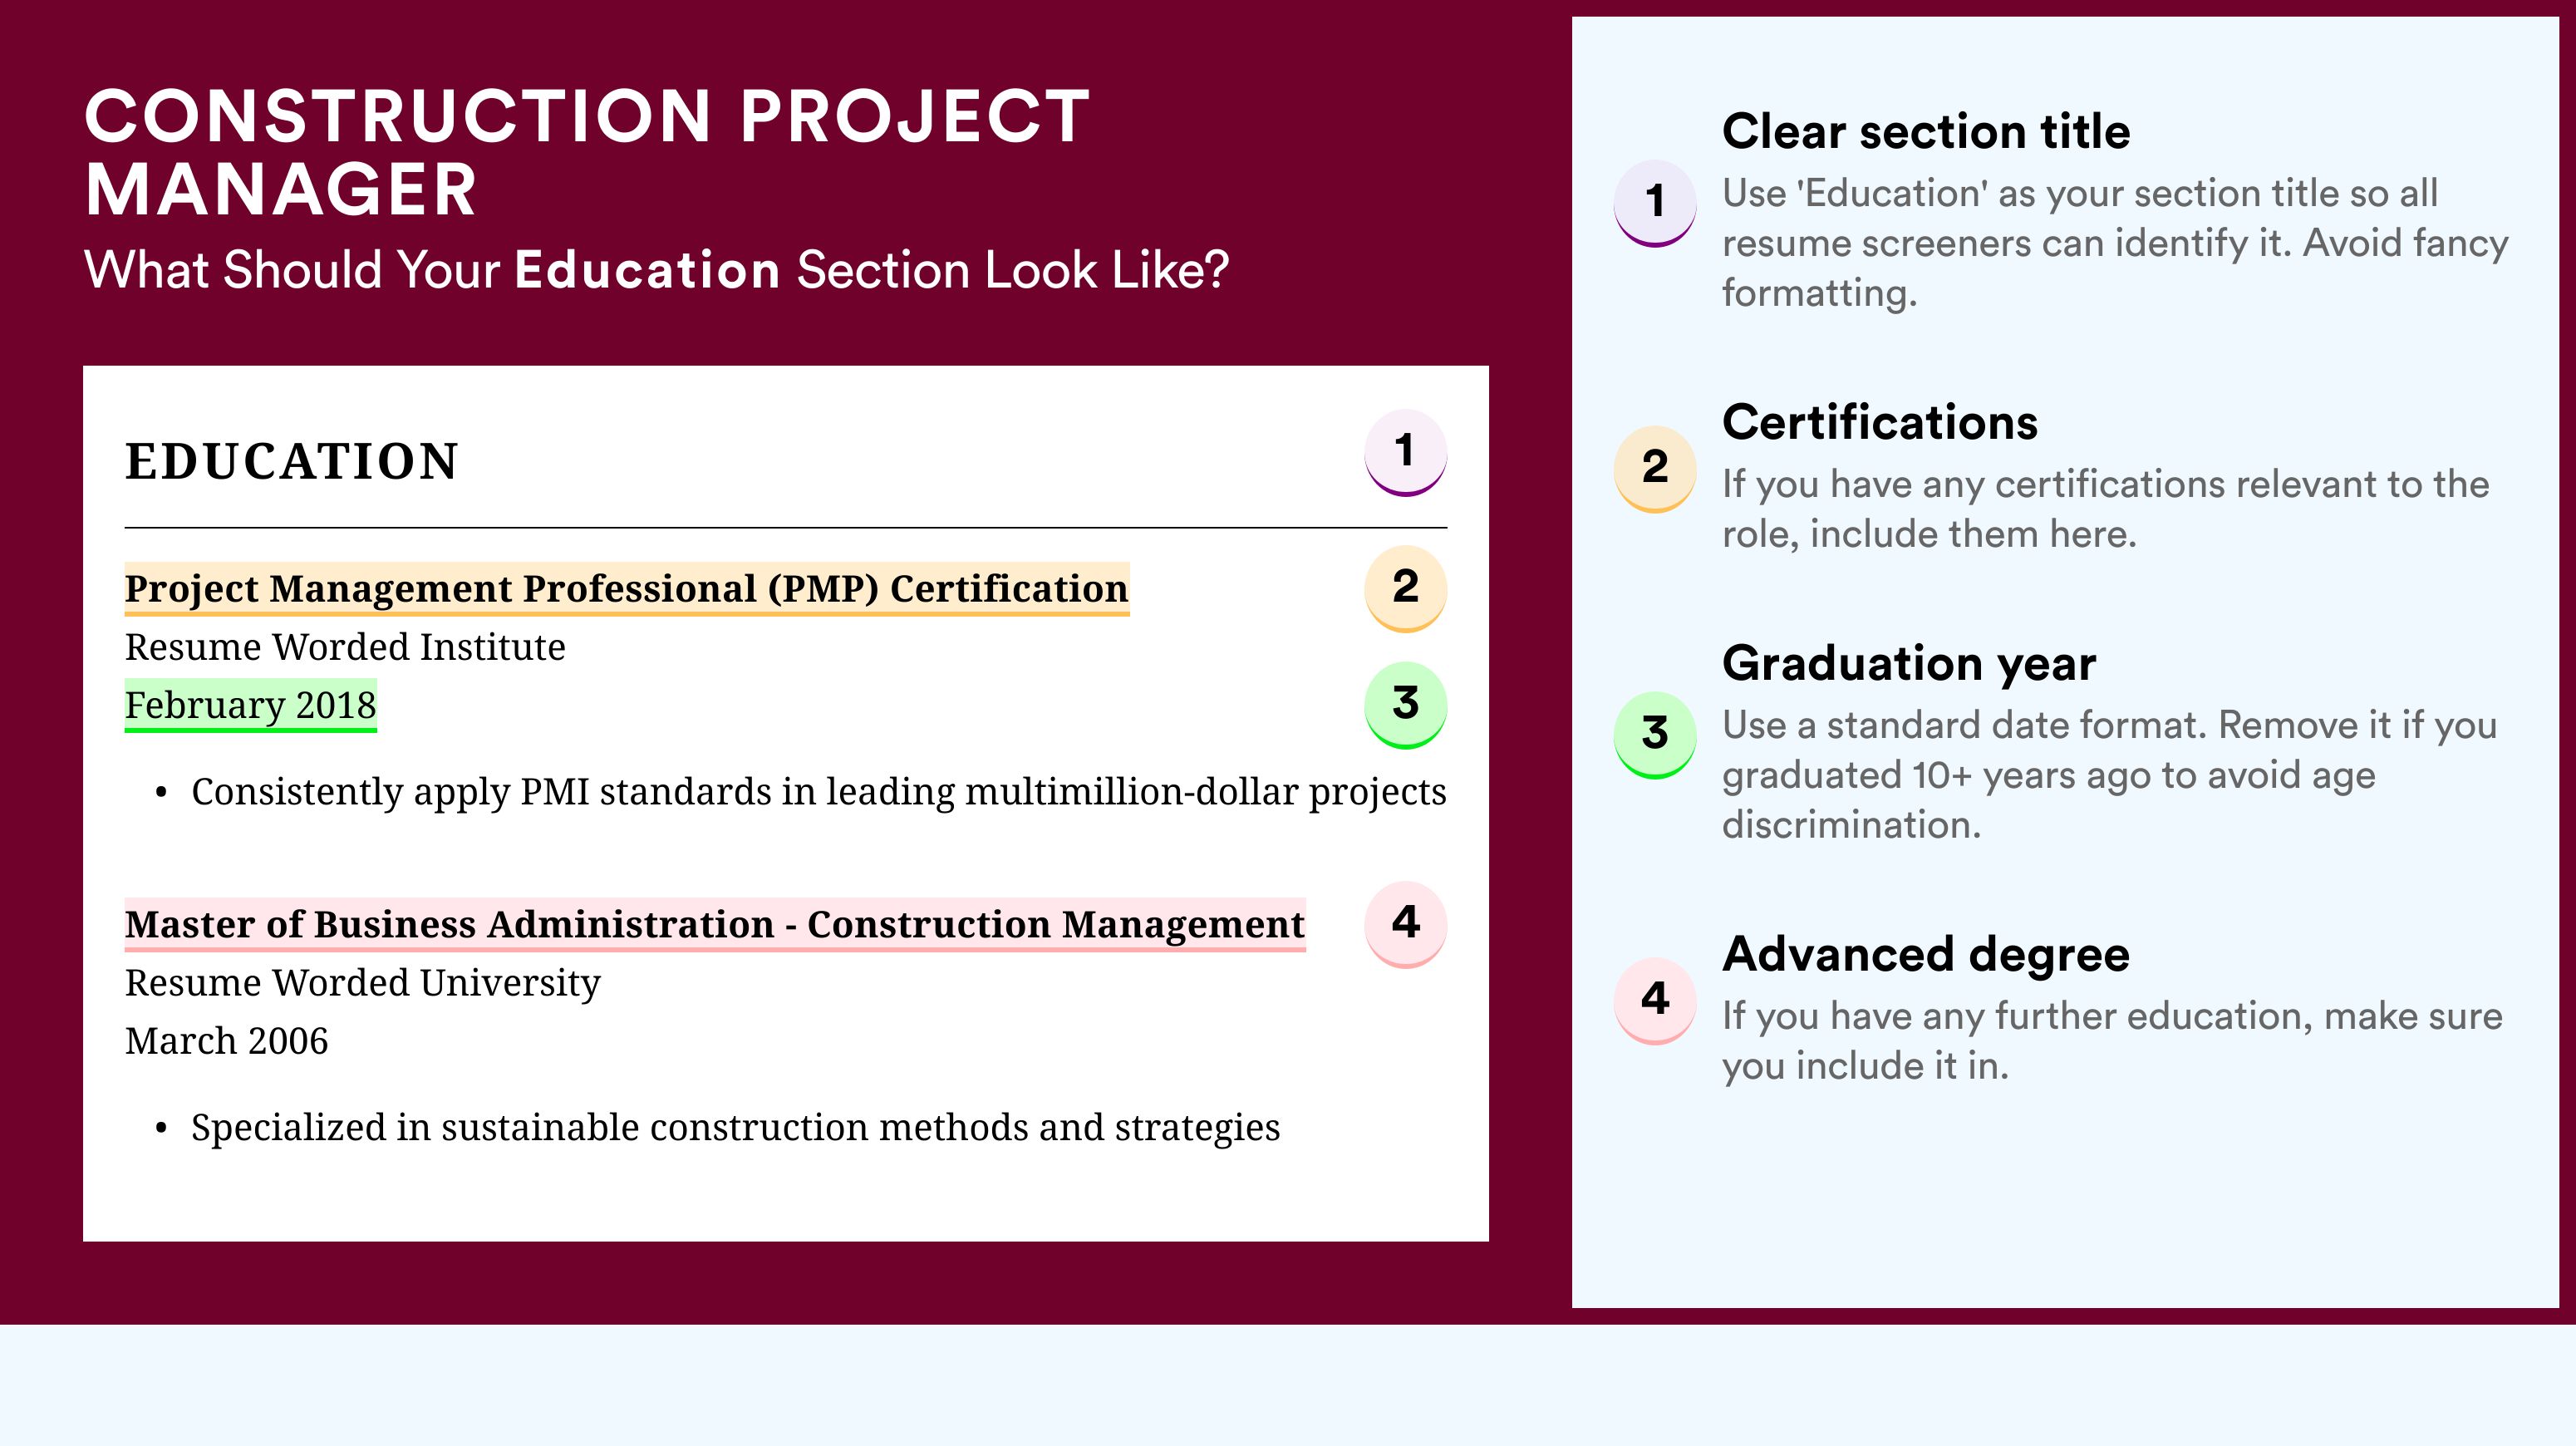 How To Write An Education Section - Construction Project Manager Roles